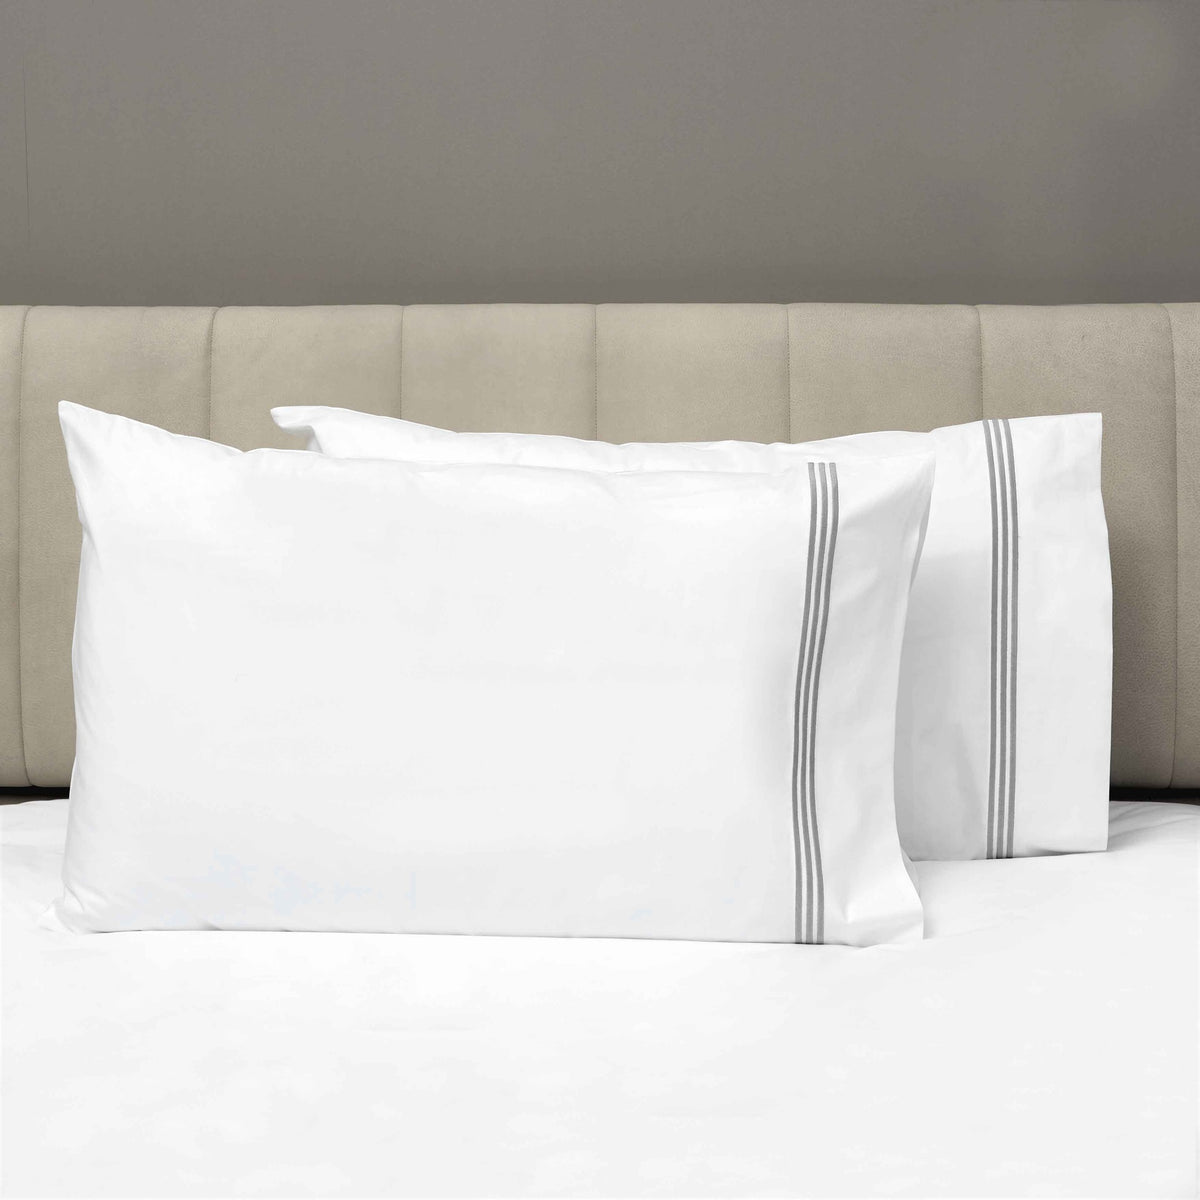 Pair of Pillowcases of Signoria Platinum Percale Bedding in White/Silver Moon Color